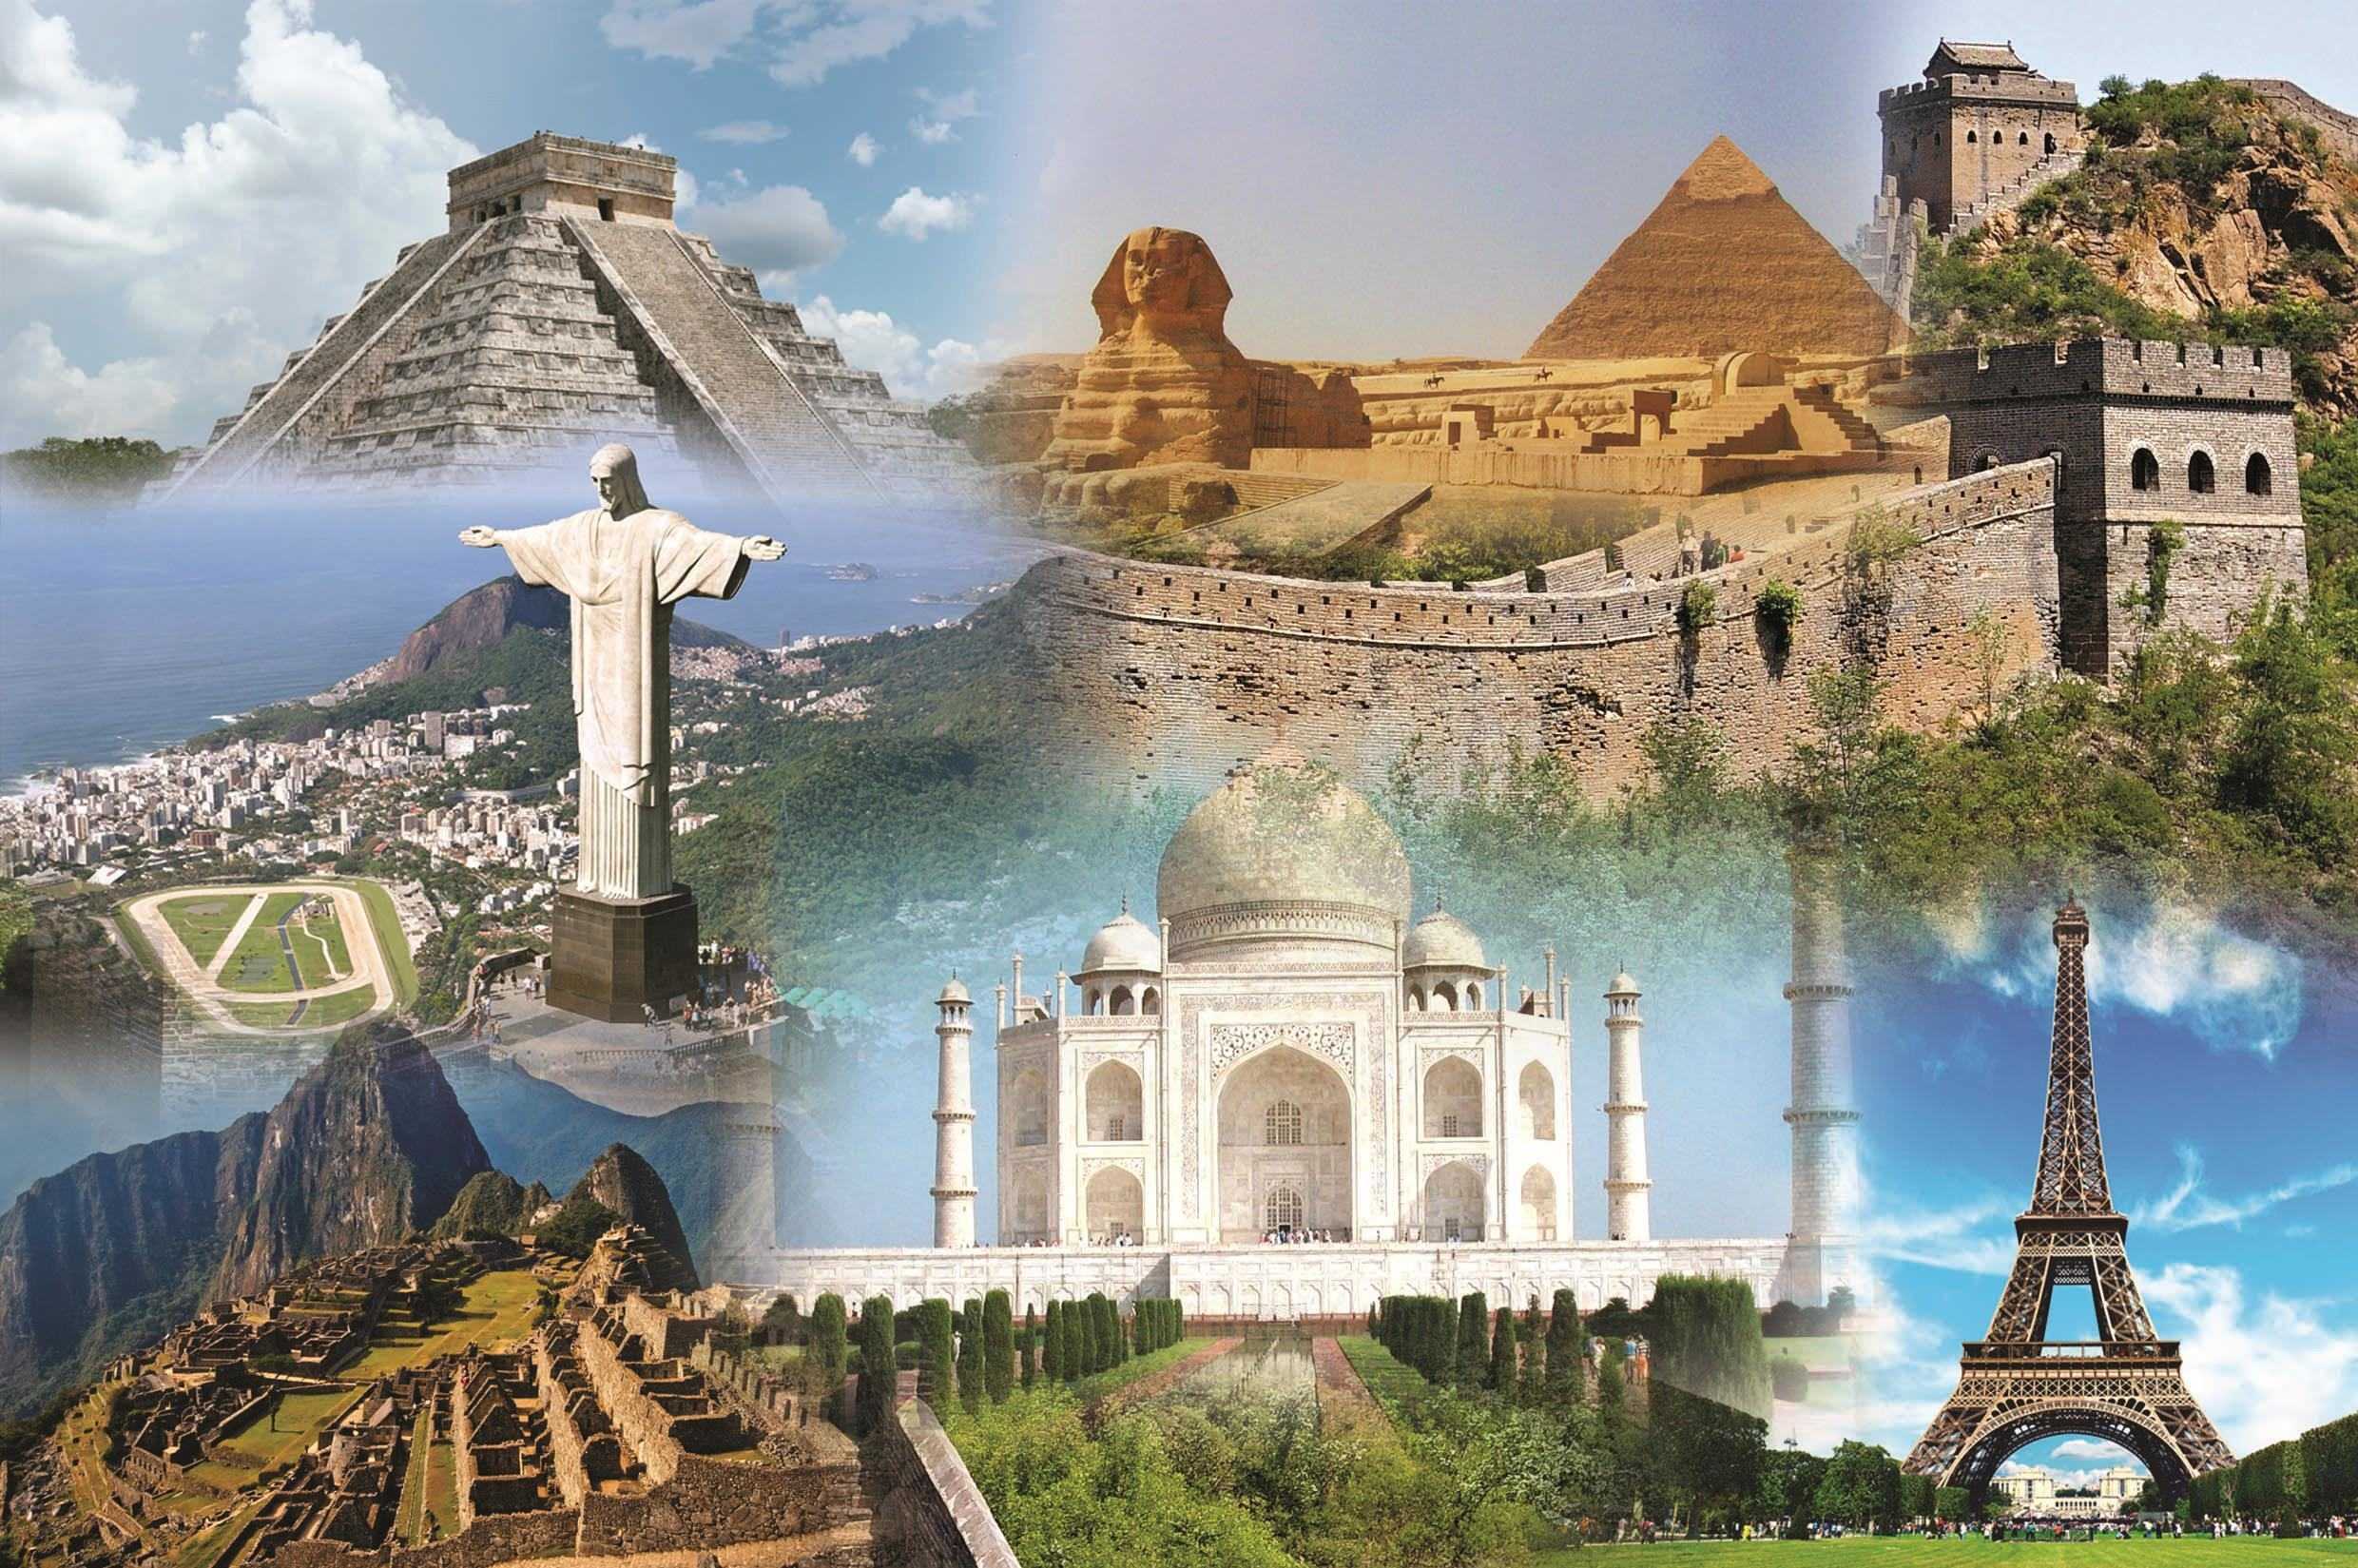 Seven wonders of the world are. Семь чудес света семь чудес света. Чудеса света 7 чудес. Древние семь чудес света.